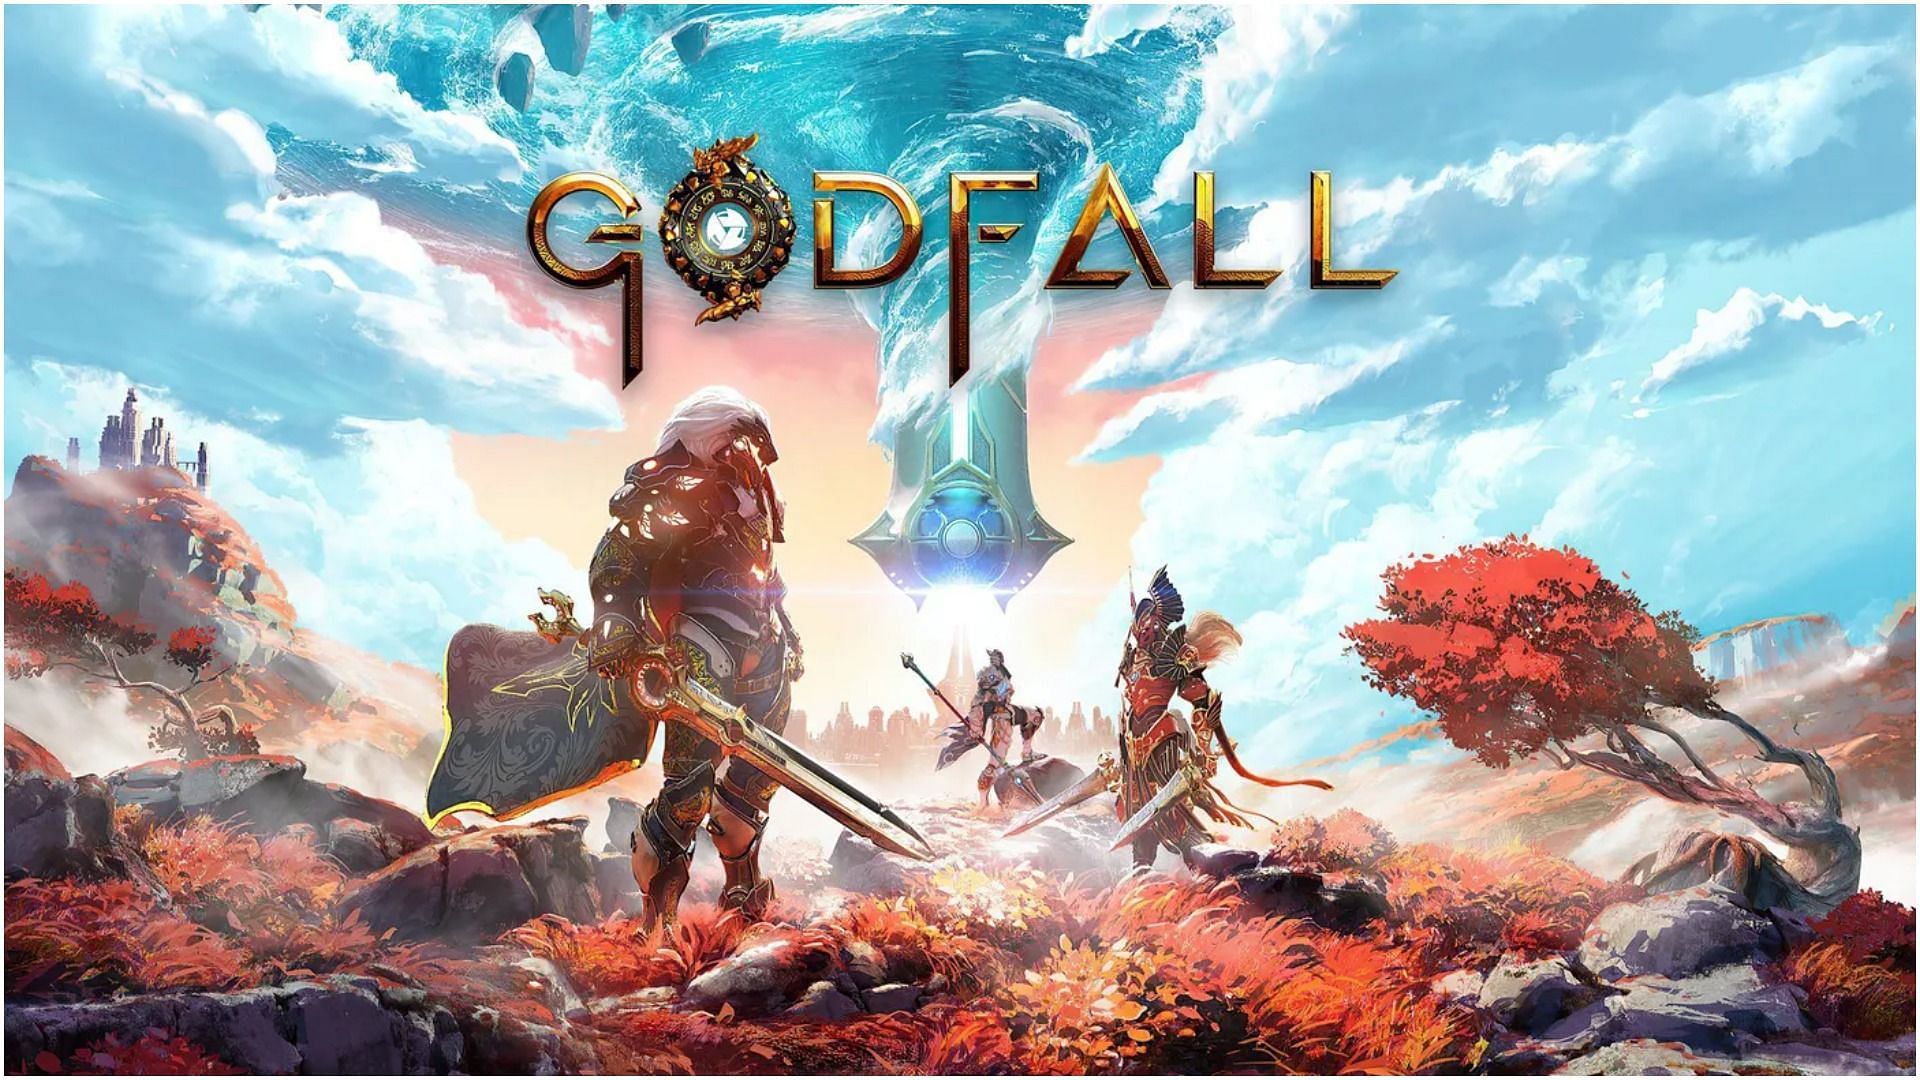 Godfall Ultimate Edition is coming soon to Xbox (Image via Gearbox)